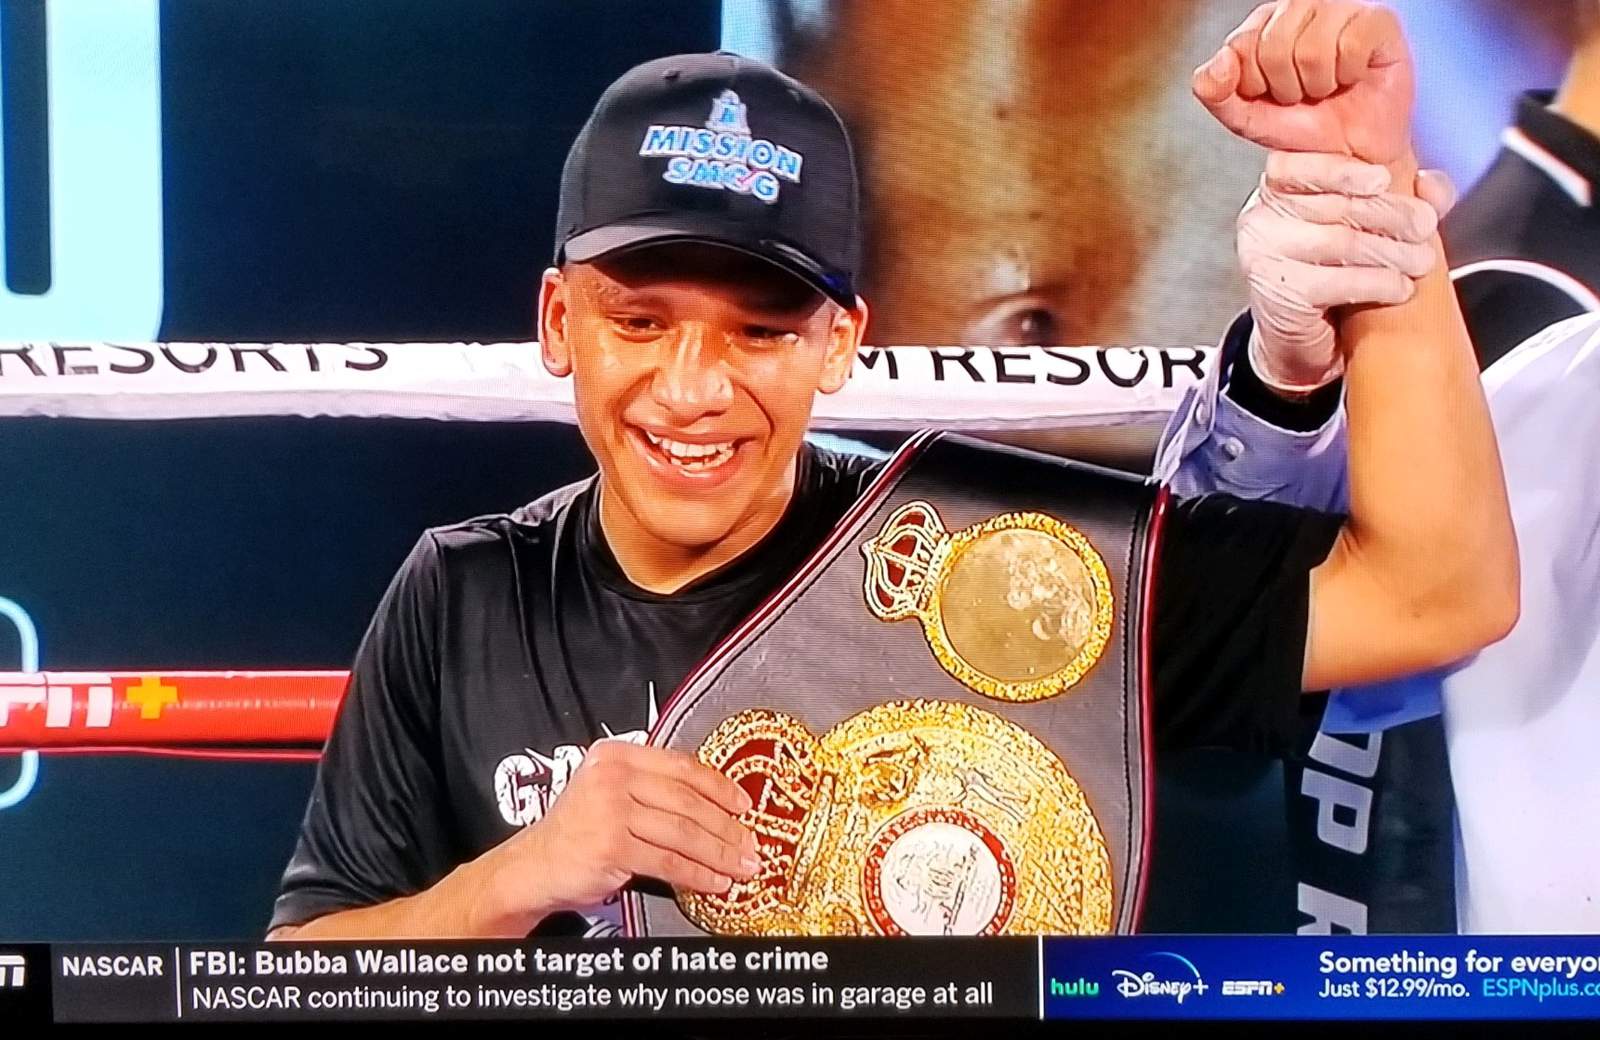 INSIDE THE RING: San Antonio boxer Joshua Franco becomes new world champ after upset win